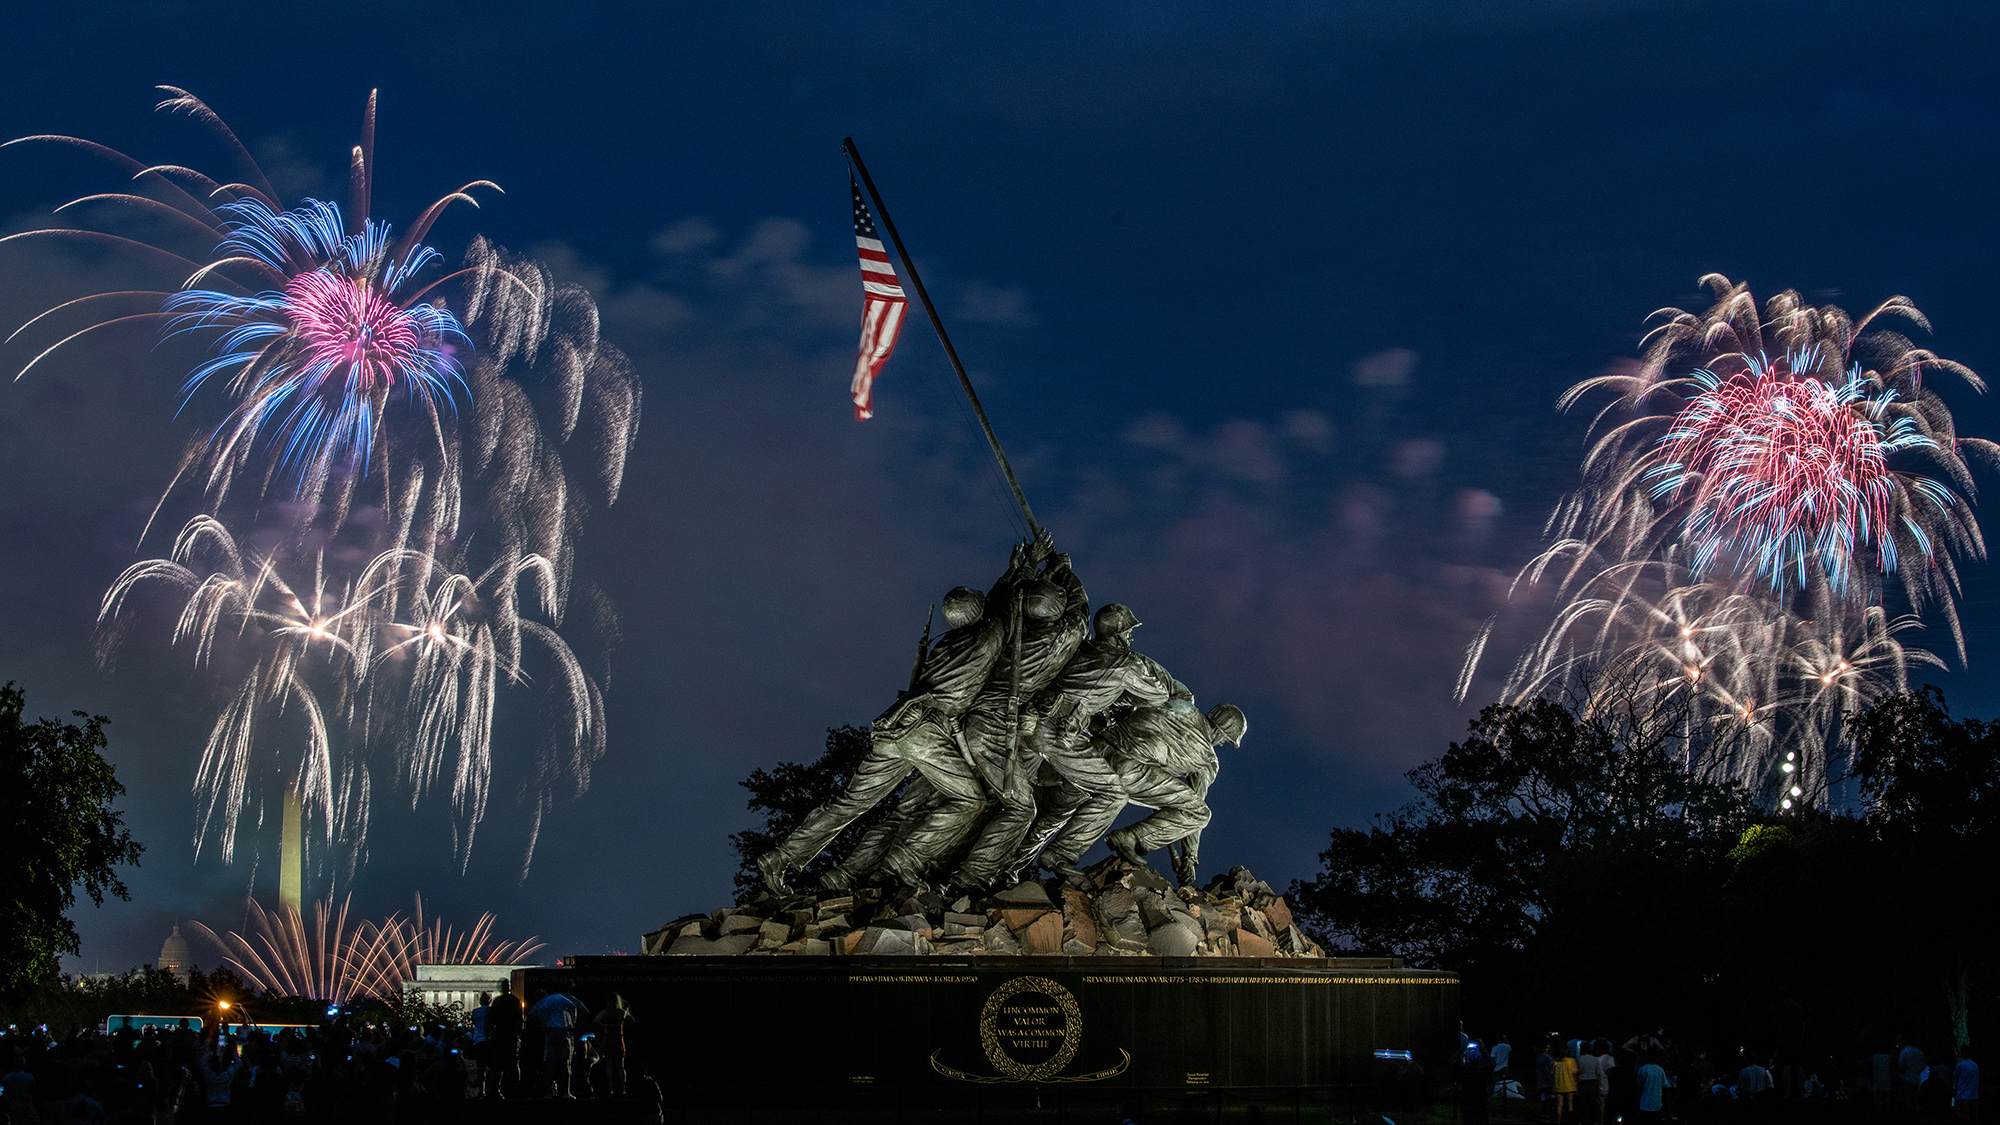 independence-day-celebration-with-dual-fireworks-are-seen-from-the-iwo-jim-2.jpg